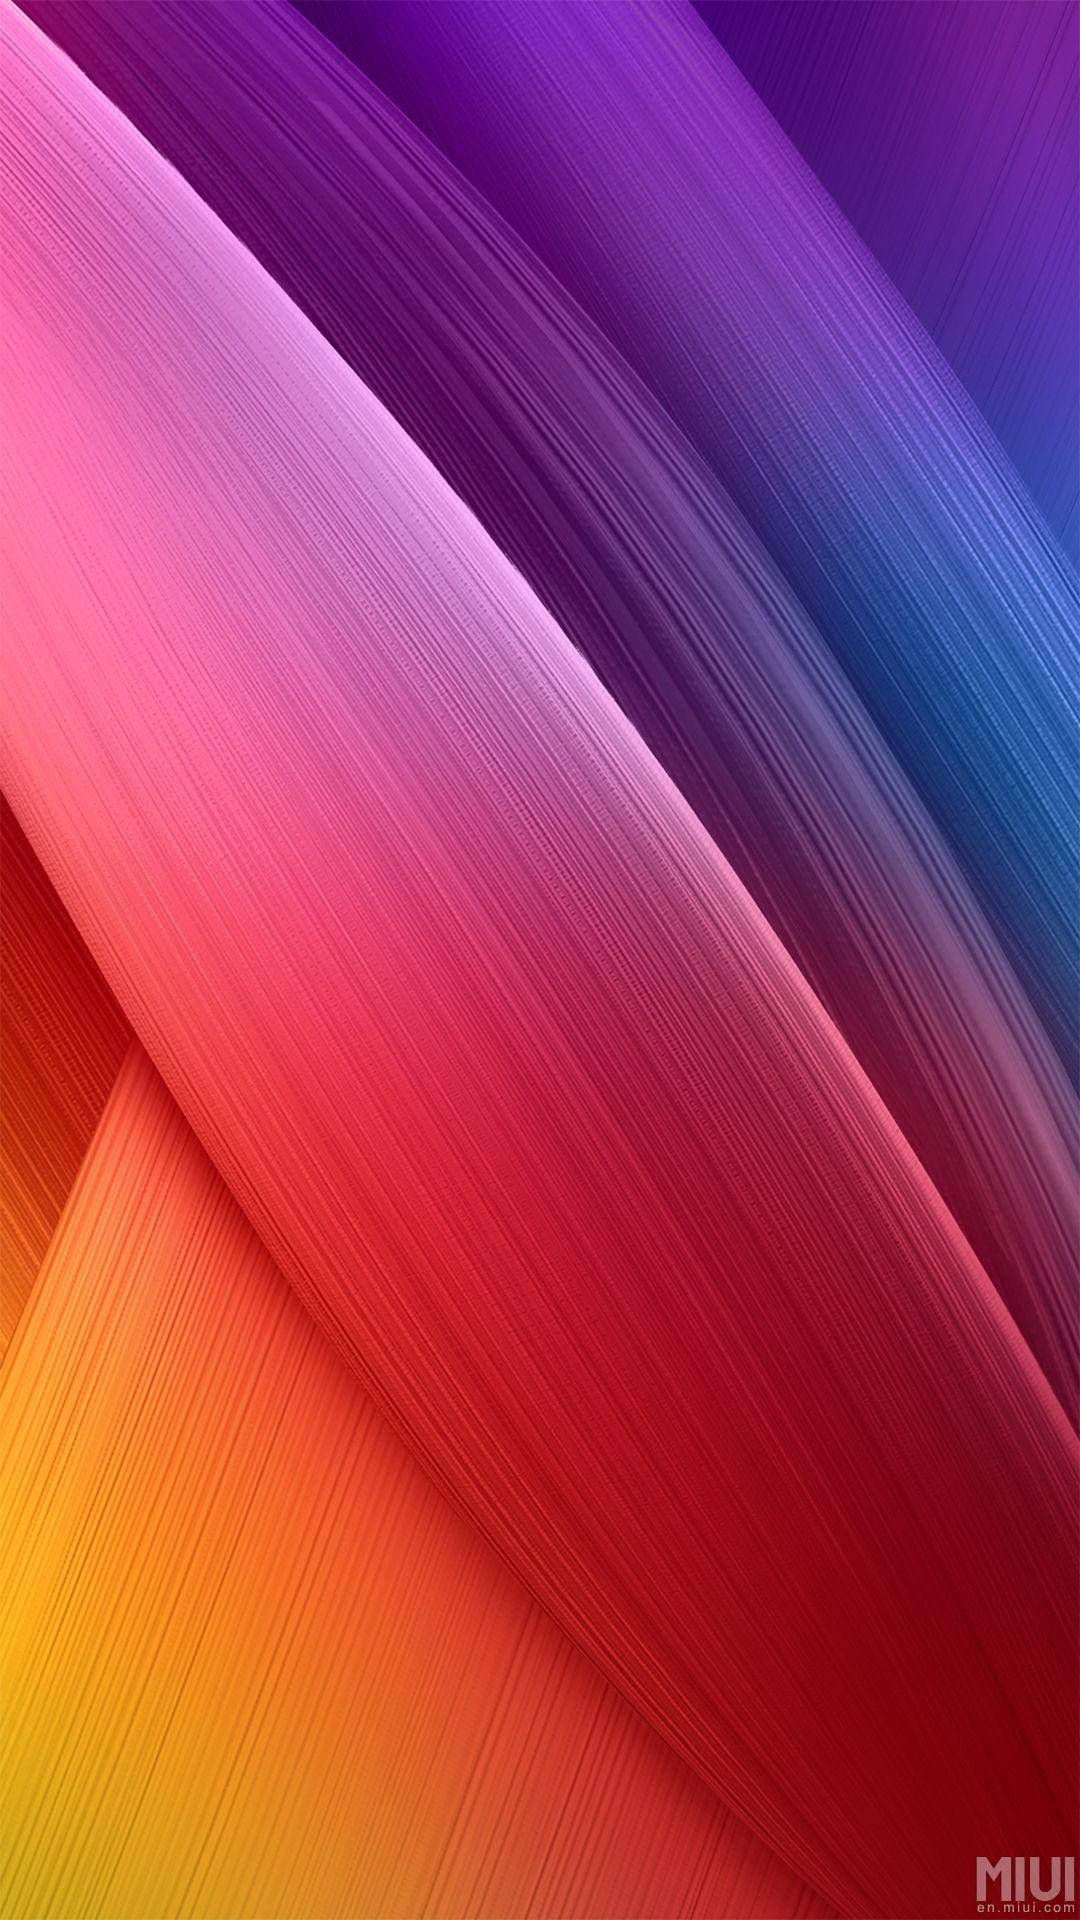 Download 34 of the MIUI 13 wallpapers here  Android Authority